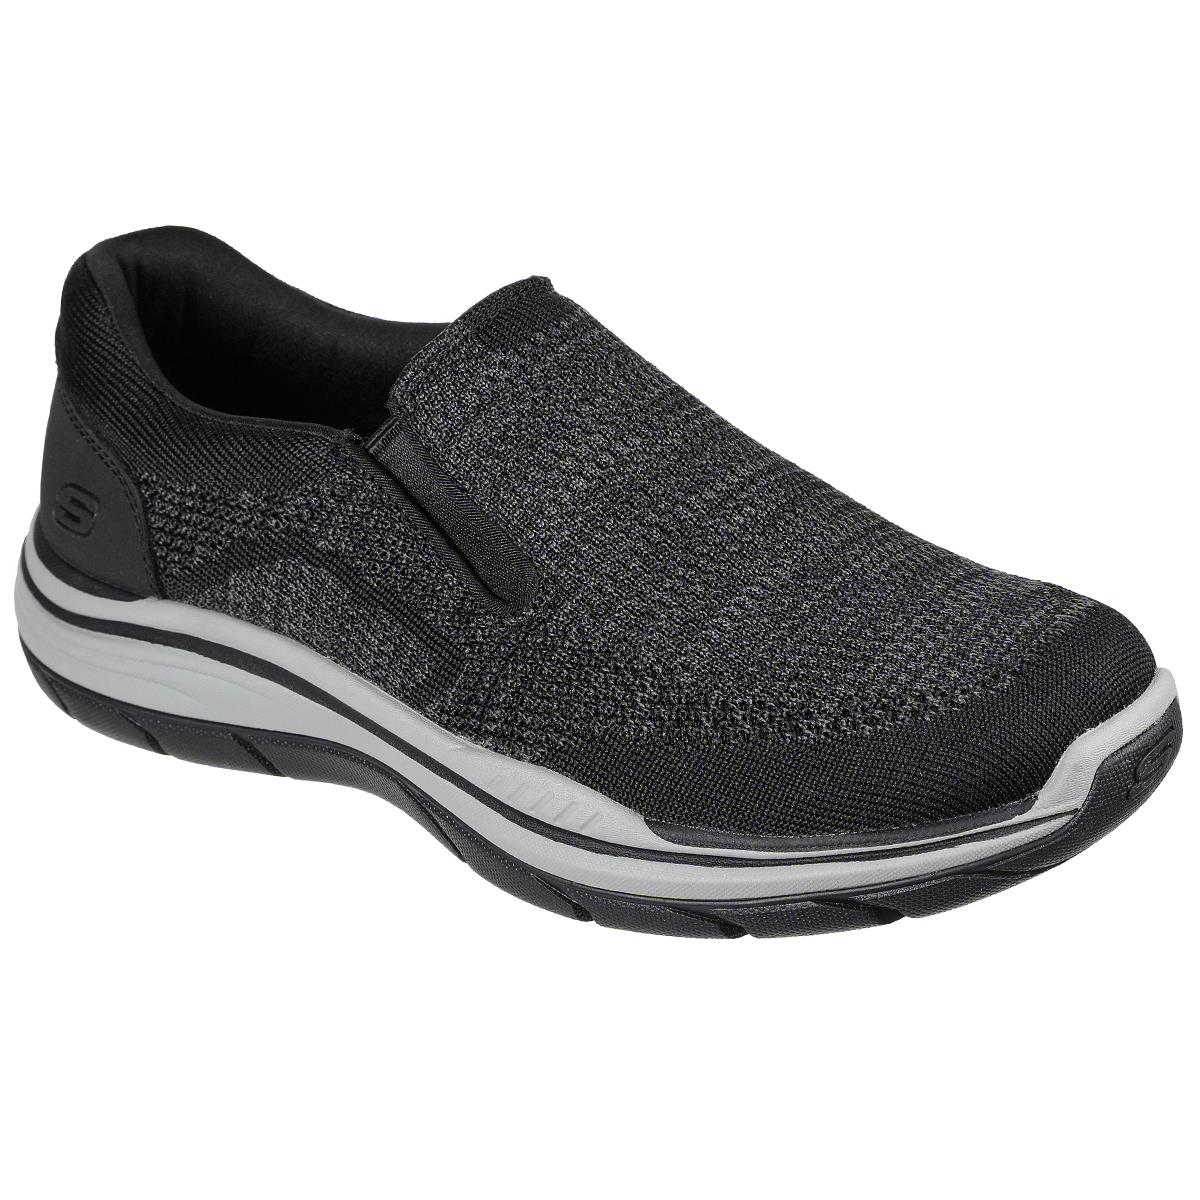 Skechers Men`s Relaxed Fit Expected 2.0 Arago Slip-on Shoes BLK